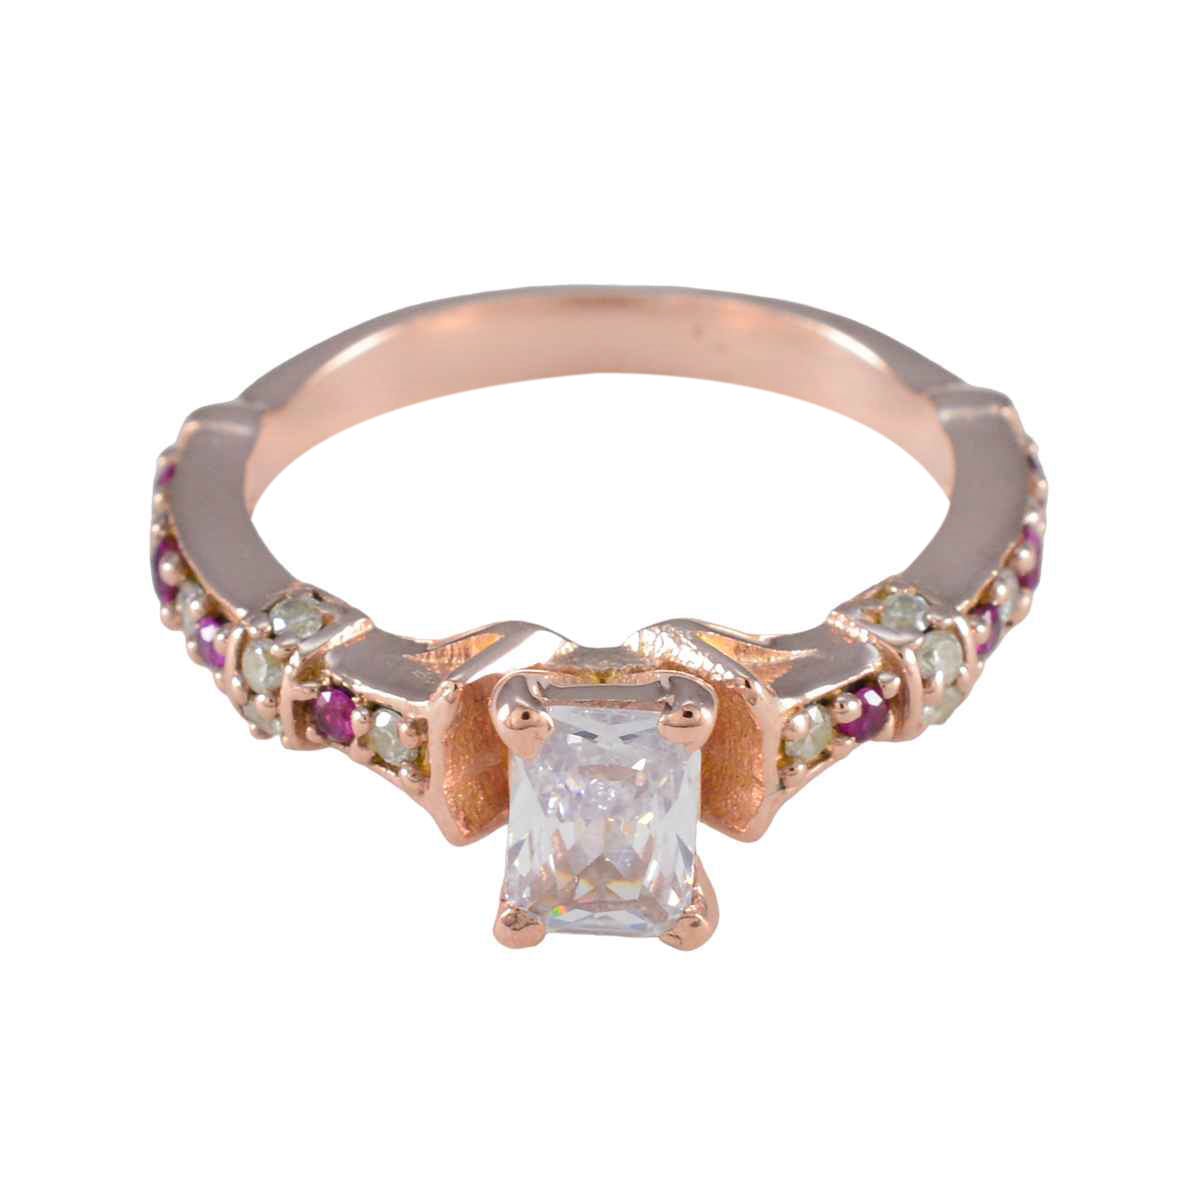 Riyo Charming Silver Ring With Rose Gold Plating Ruby CZ Stone Octagon Shape Prong Setting Fashion Jewelry Cocktail Ring